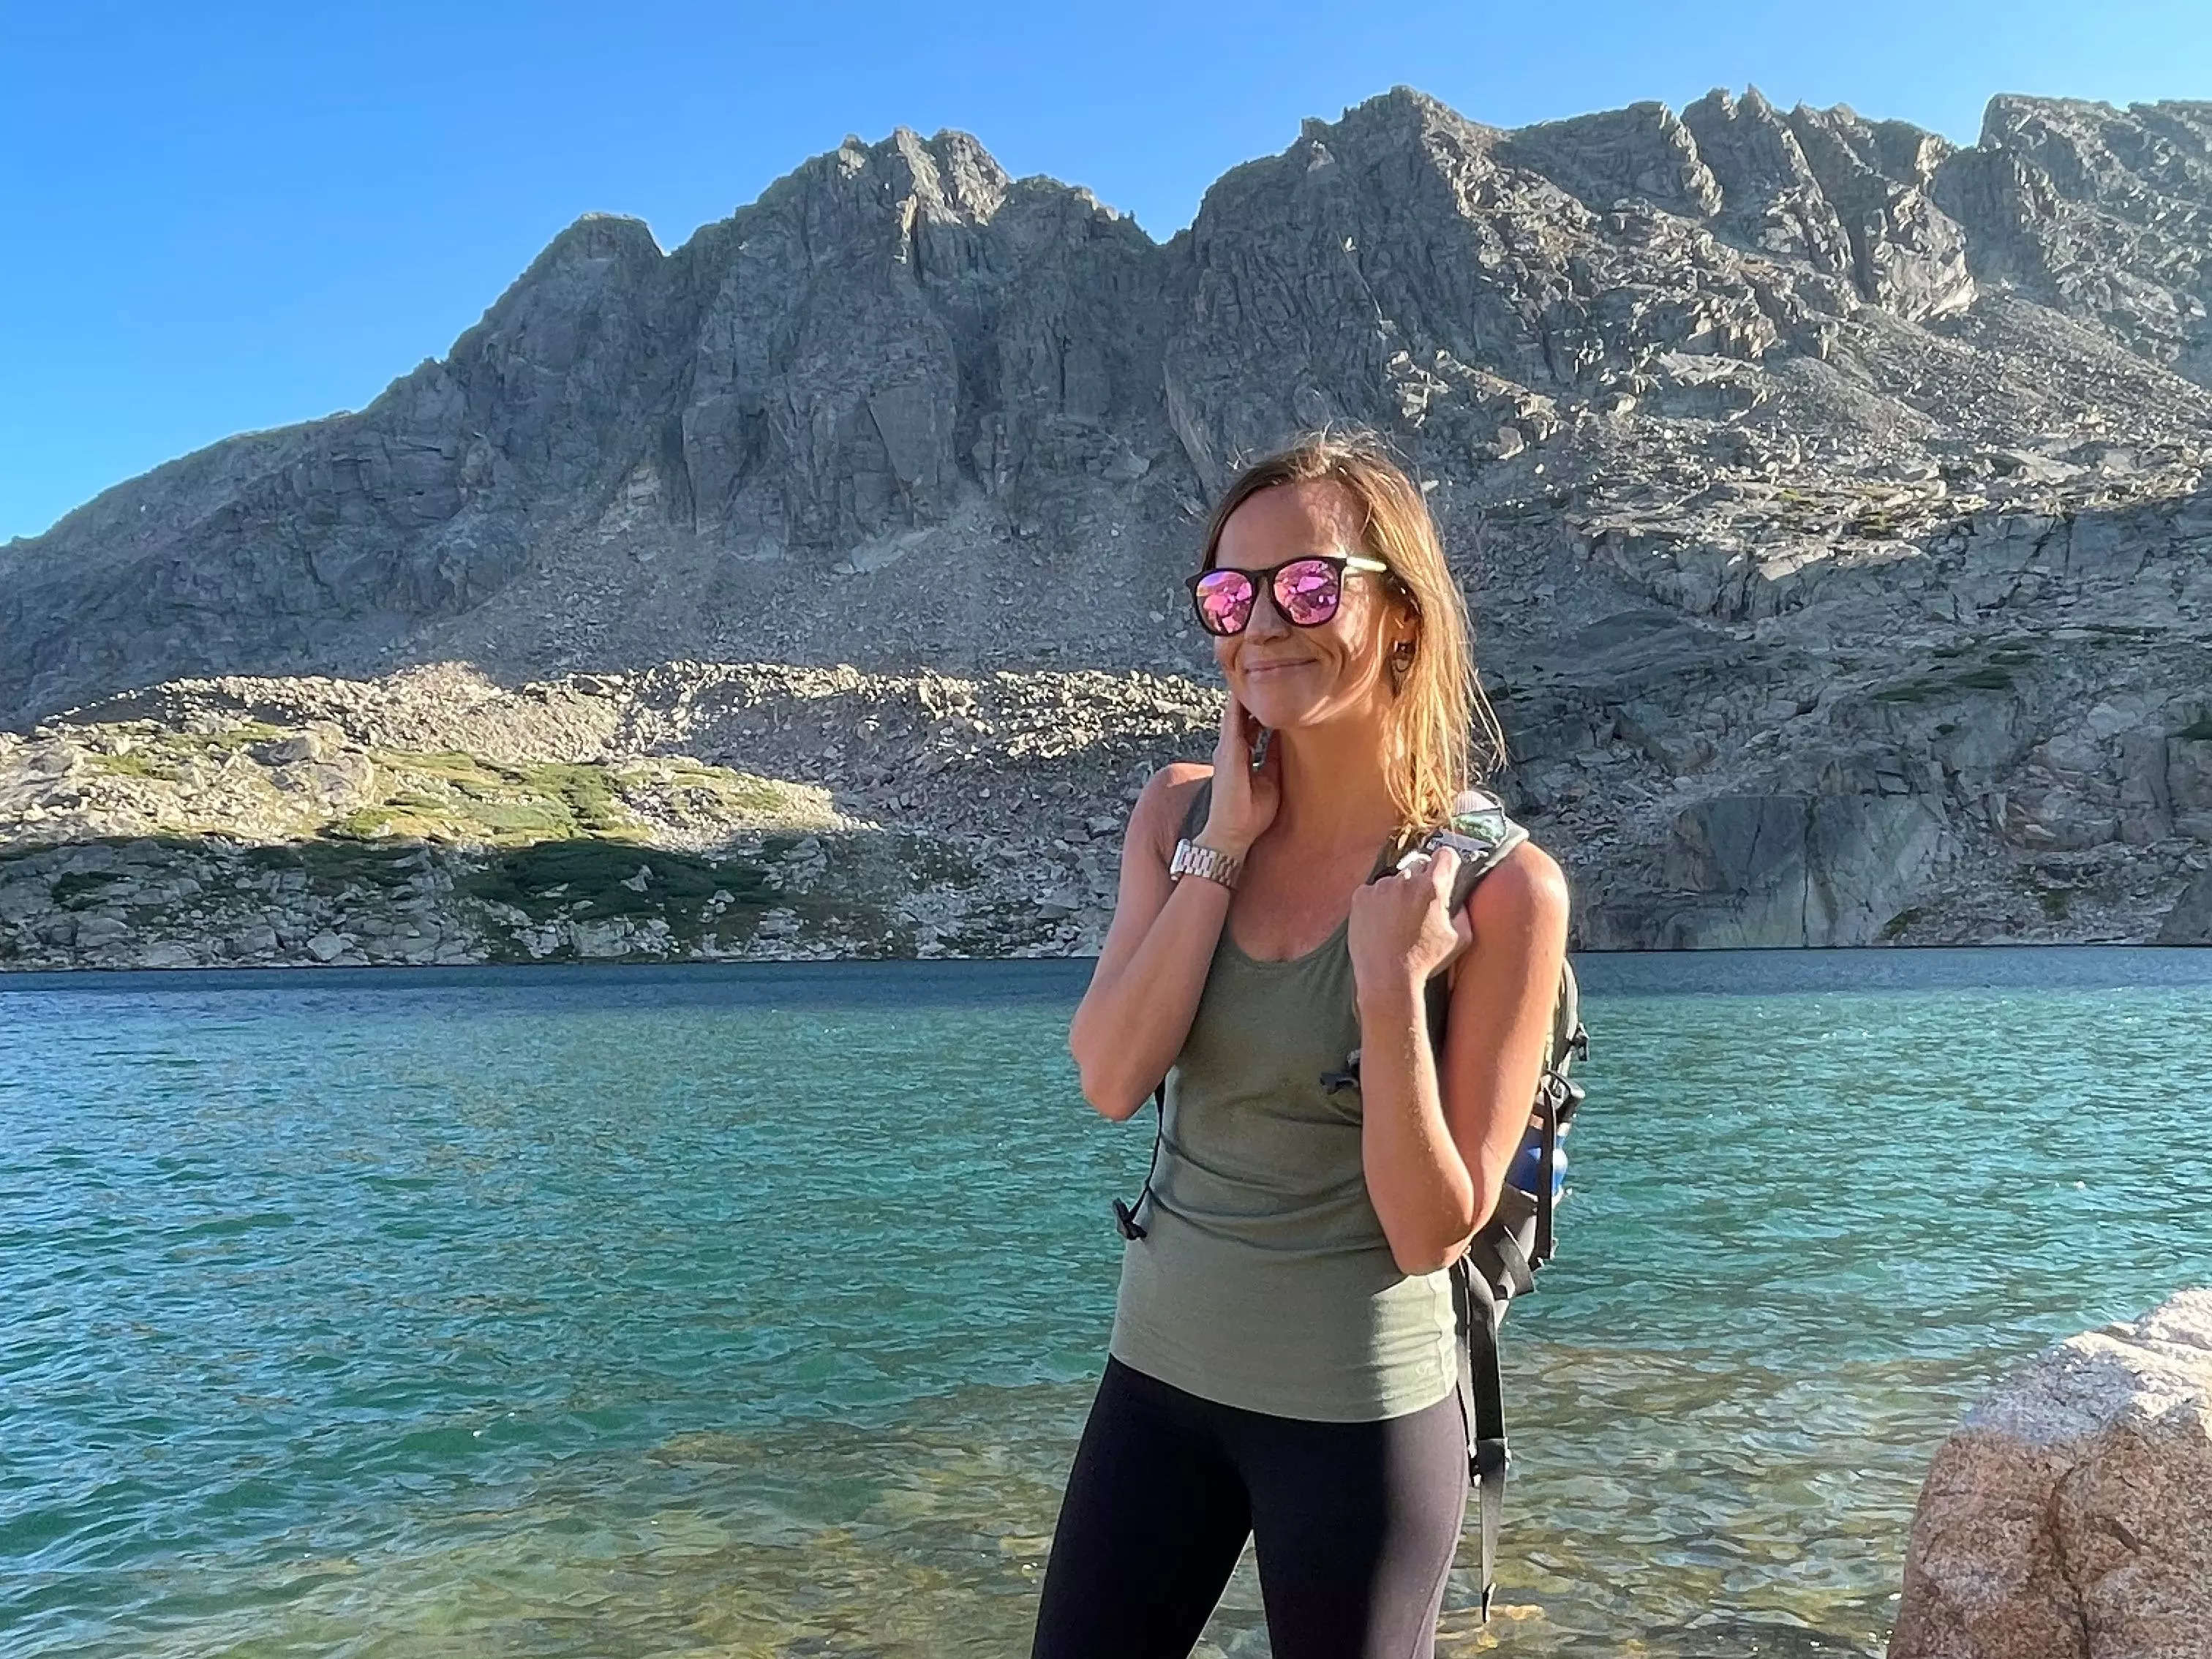 Emily, wearing sunglasses, a backpack, a green tank top, and black leggings, standing on a rock in blue water surrounded by mountains.